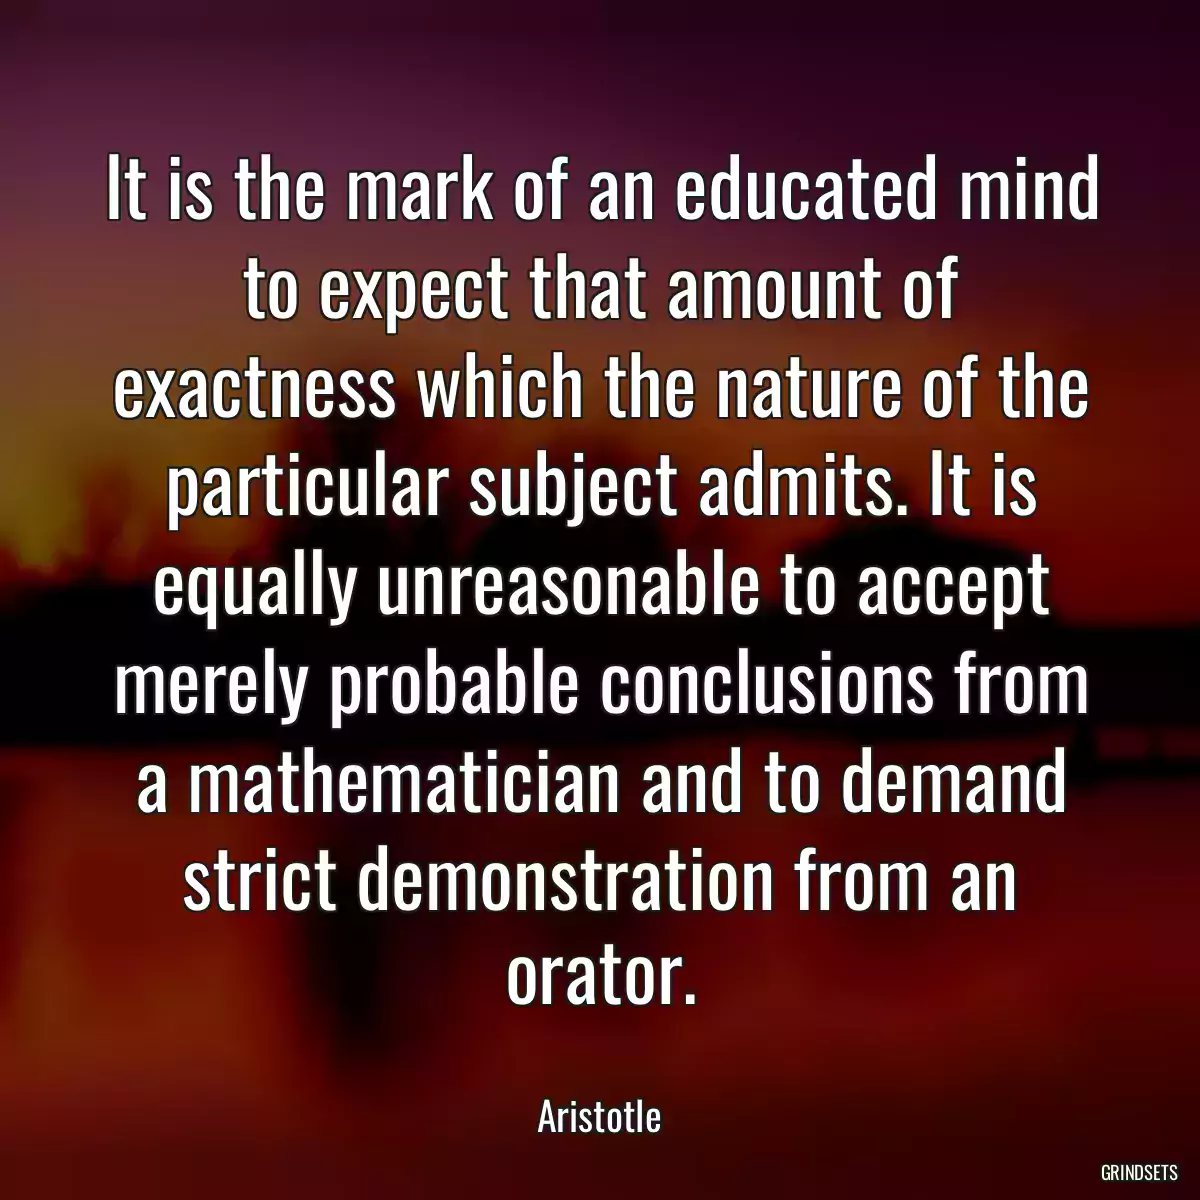 It is the mark of an educated mind to expect that amount of exactness which the nature of the particular subject admits. It is equally unreasonable to accept merely probable conclusions from a mathematician and to demand strict demonstration from an orator.